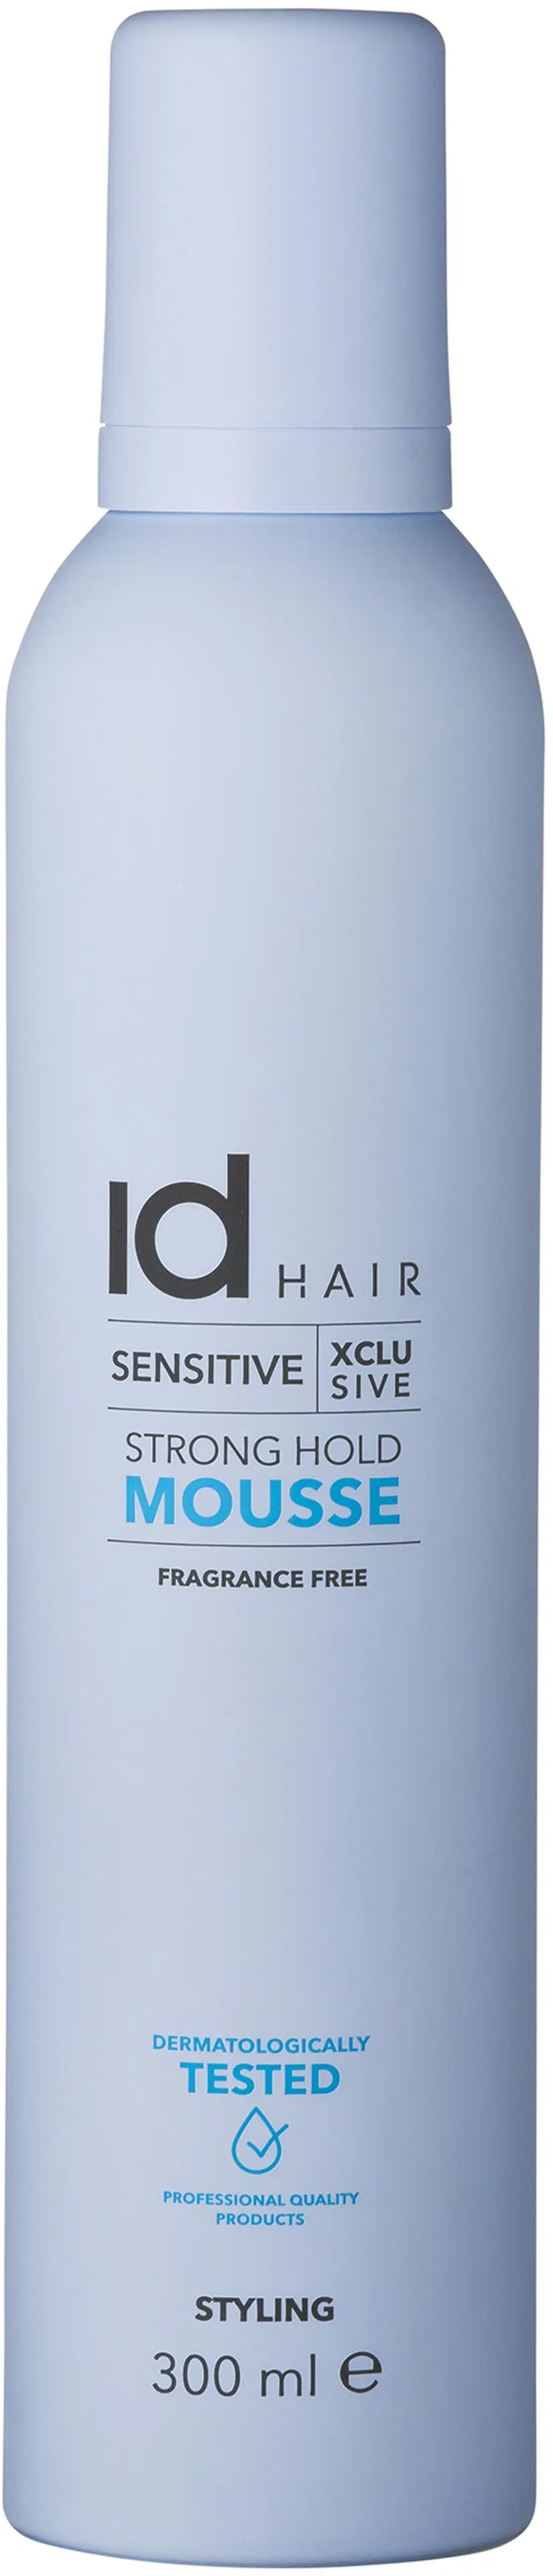 IdHAIR Sensitive Xclusive Strong Hold Mousse muotovaahto 300 ml